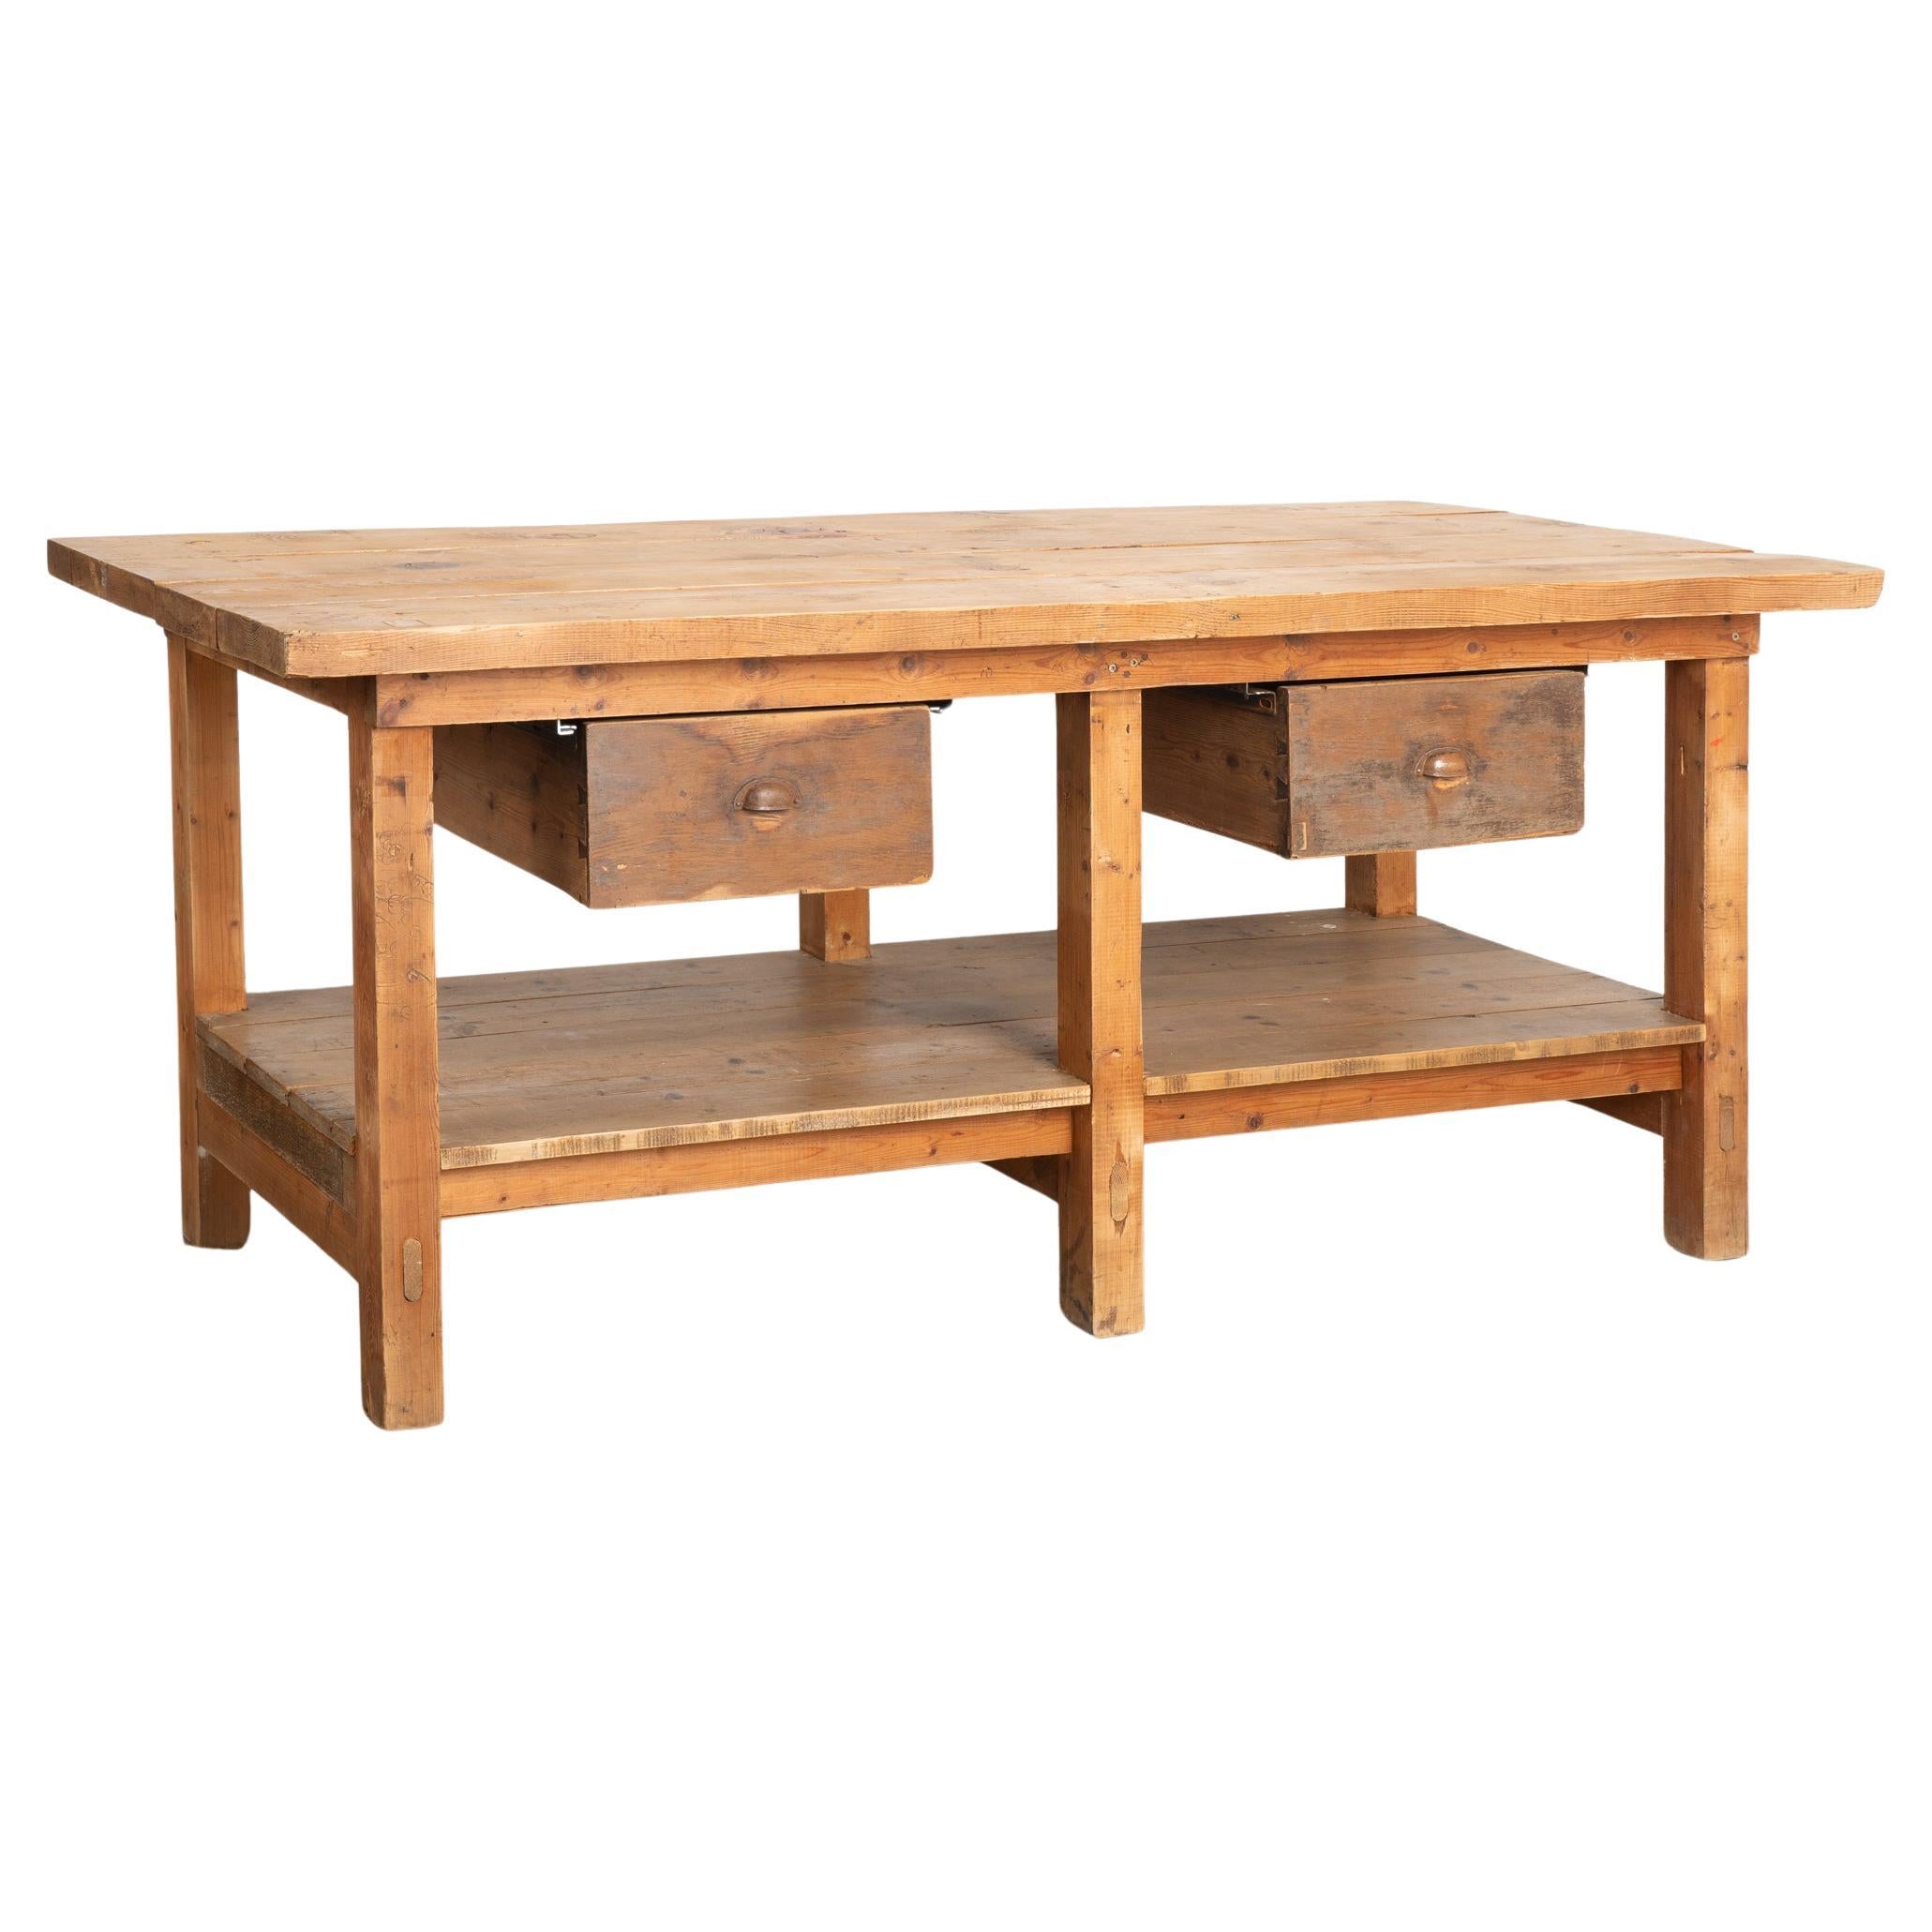 Rustic Work Table With Two Drawers and Shelf, Kitchen Island circa 1920